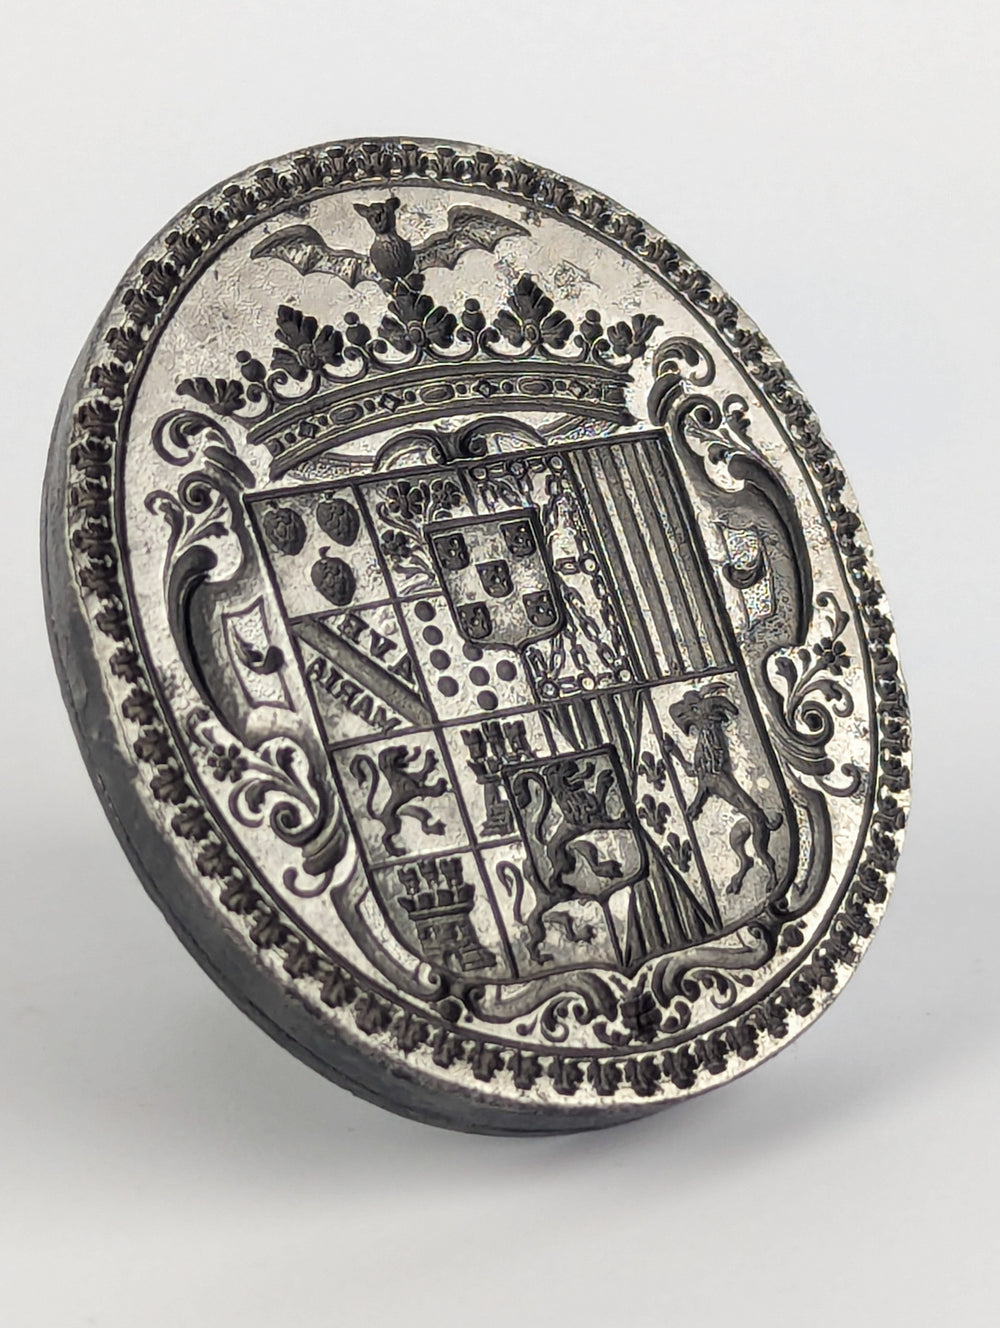 17thc Steel Continental Complex Armorial Desk Seal